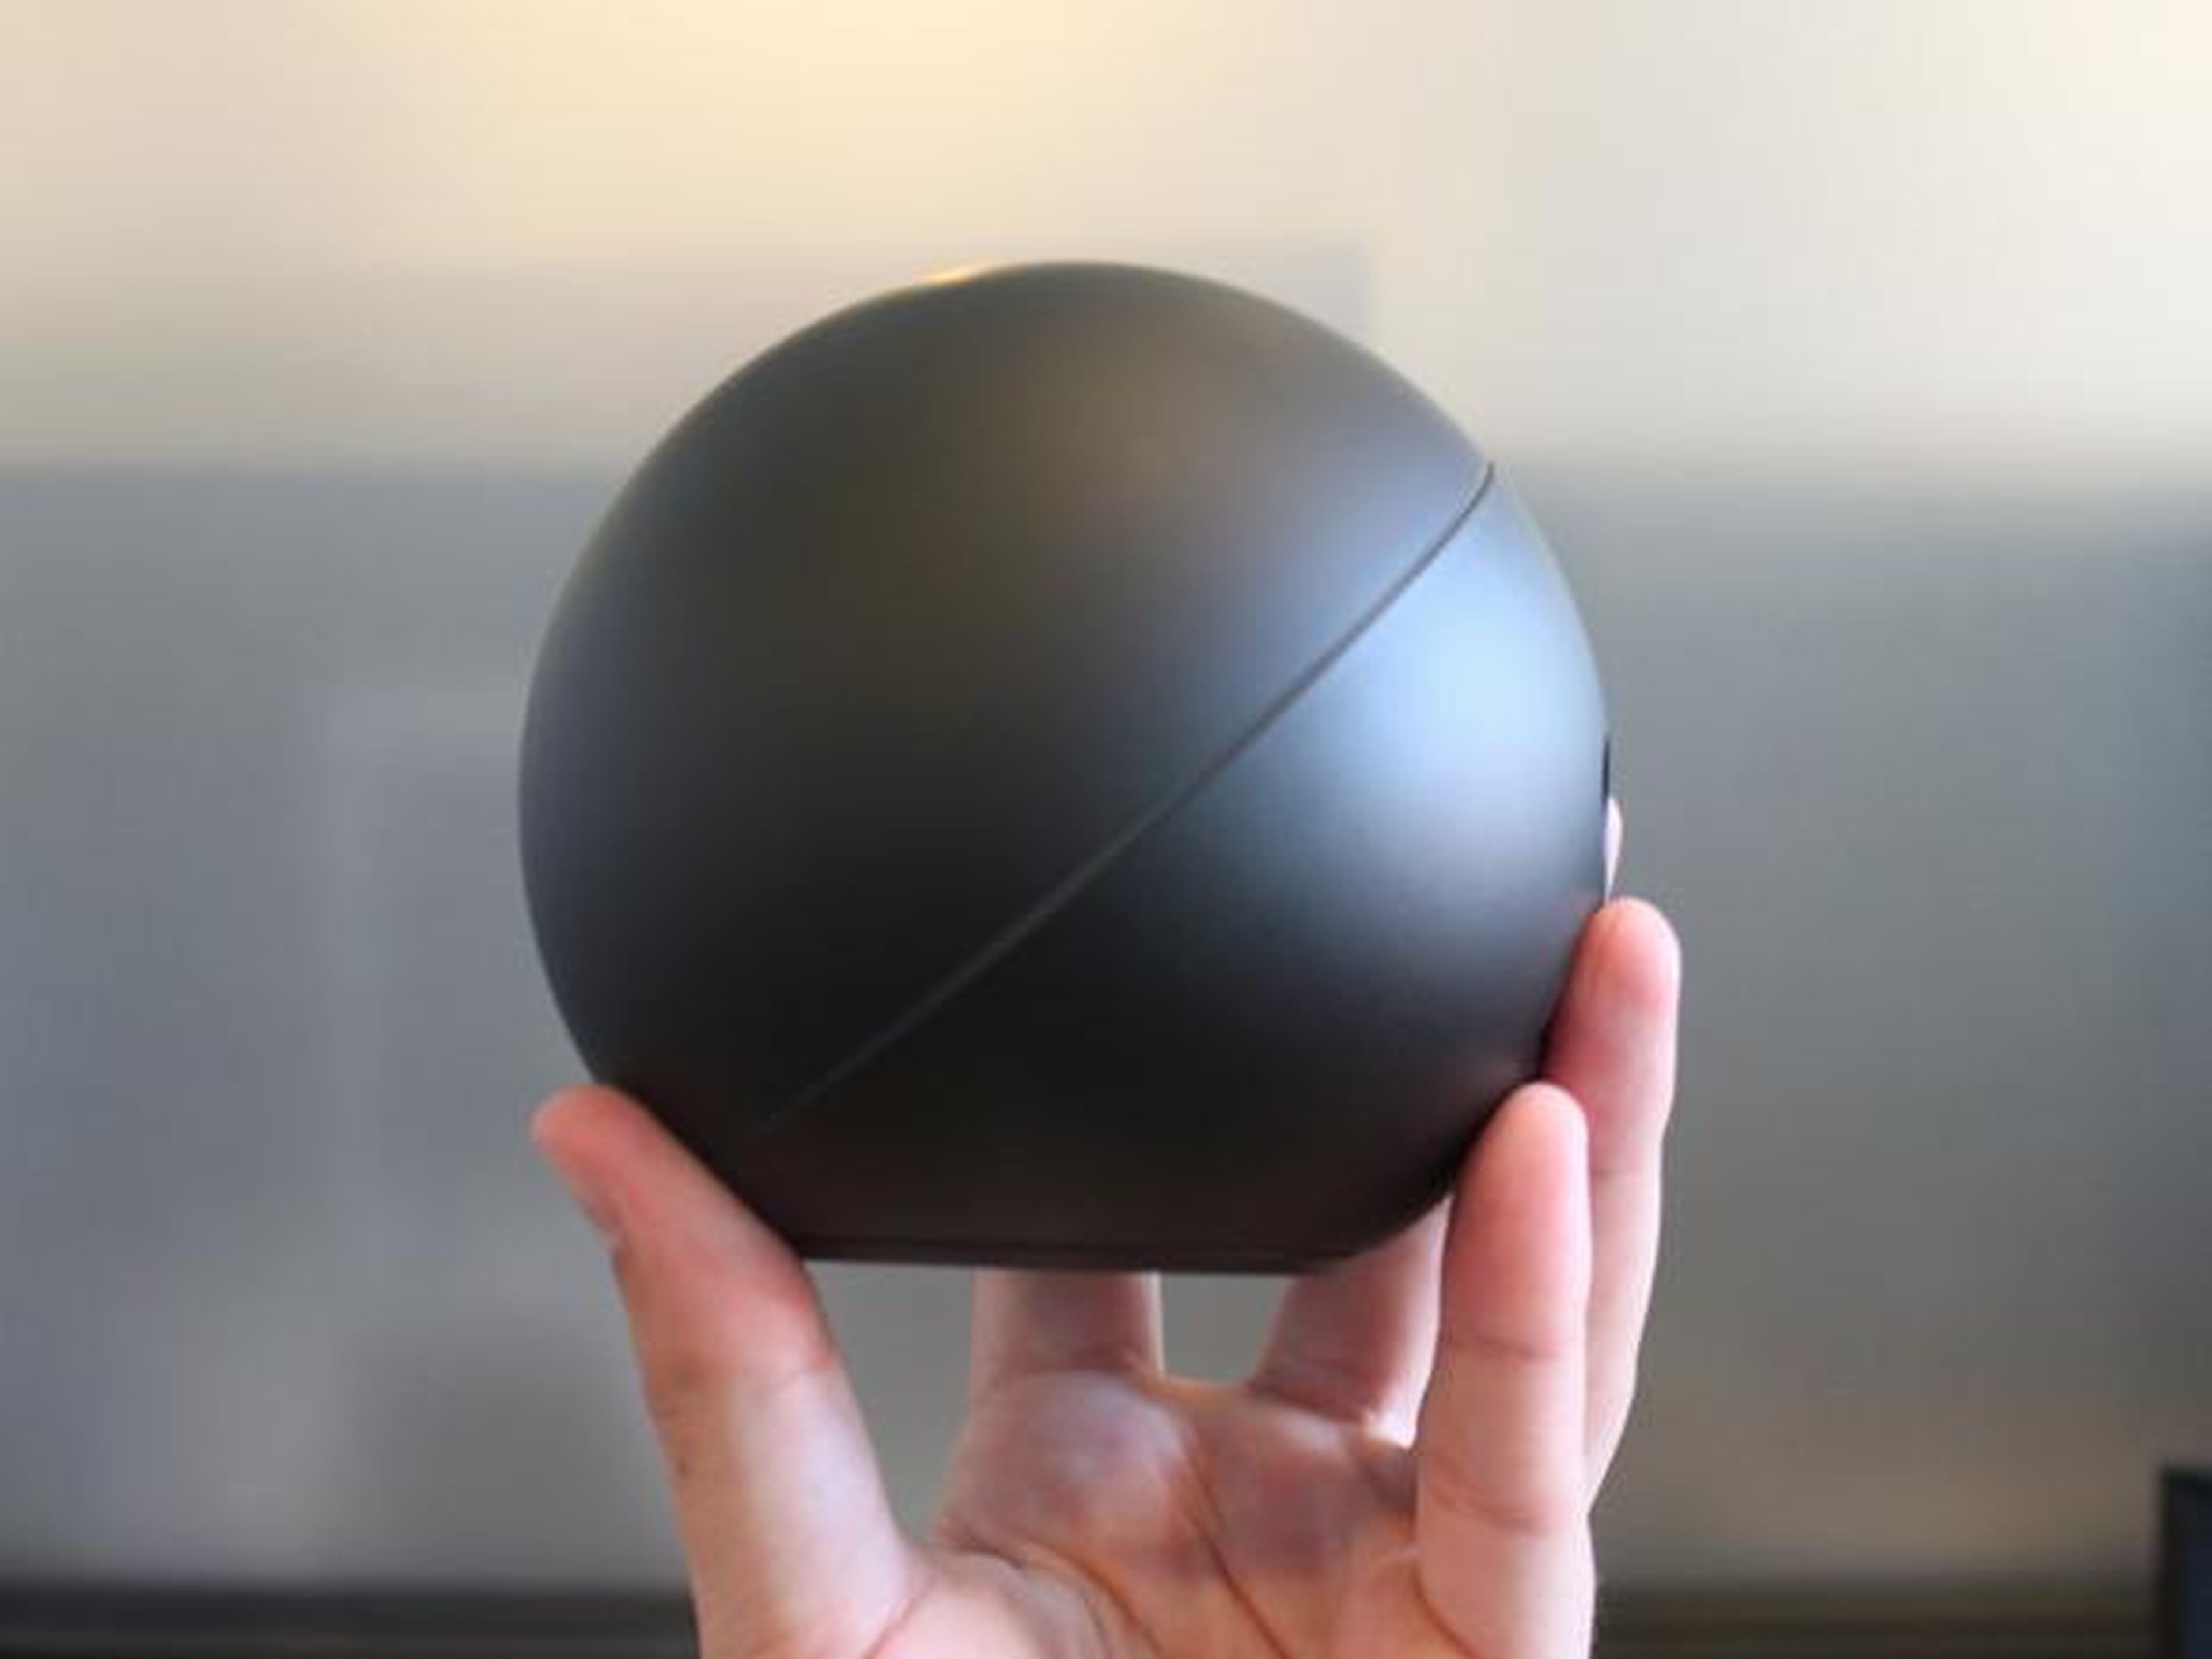 Google's Nexus Q, a streaming media player that was designed to connect all home devices, was unveiled with great fanfare at the company's 2012 developer conference. Reviews of the $299 Q in tech blogs were brutal, and Google